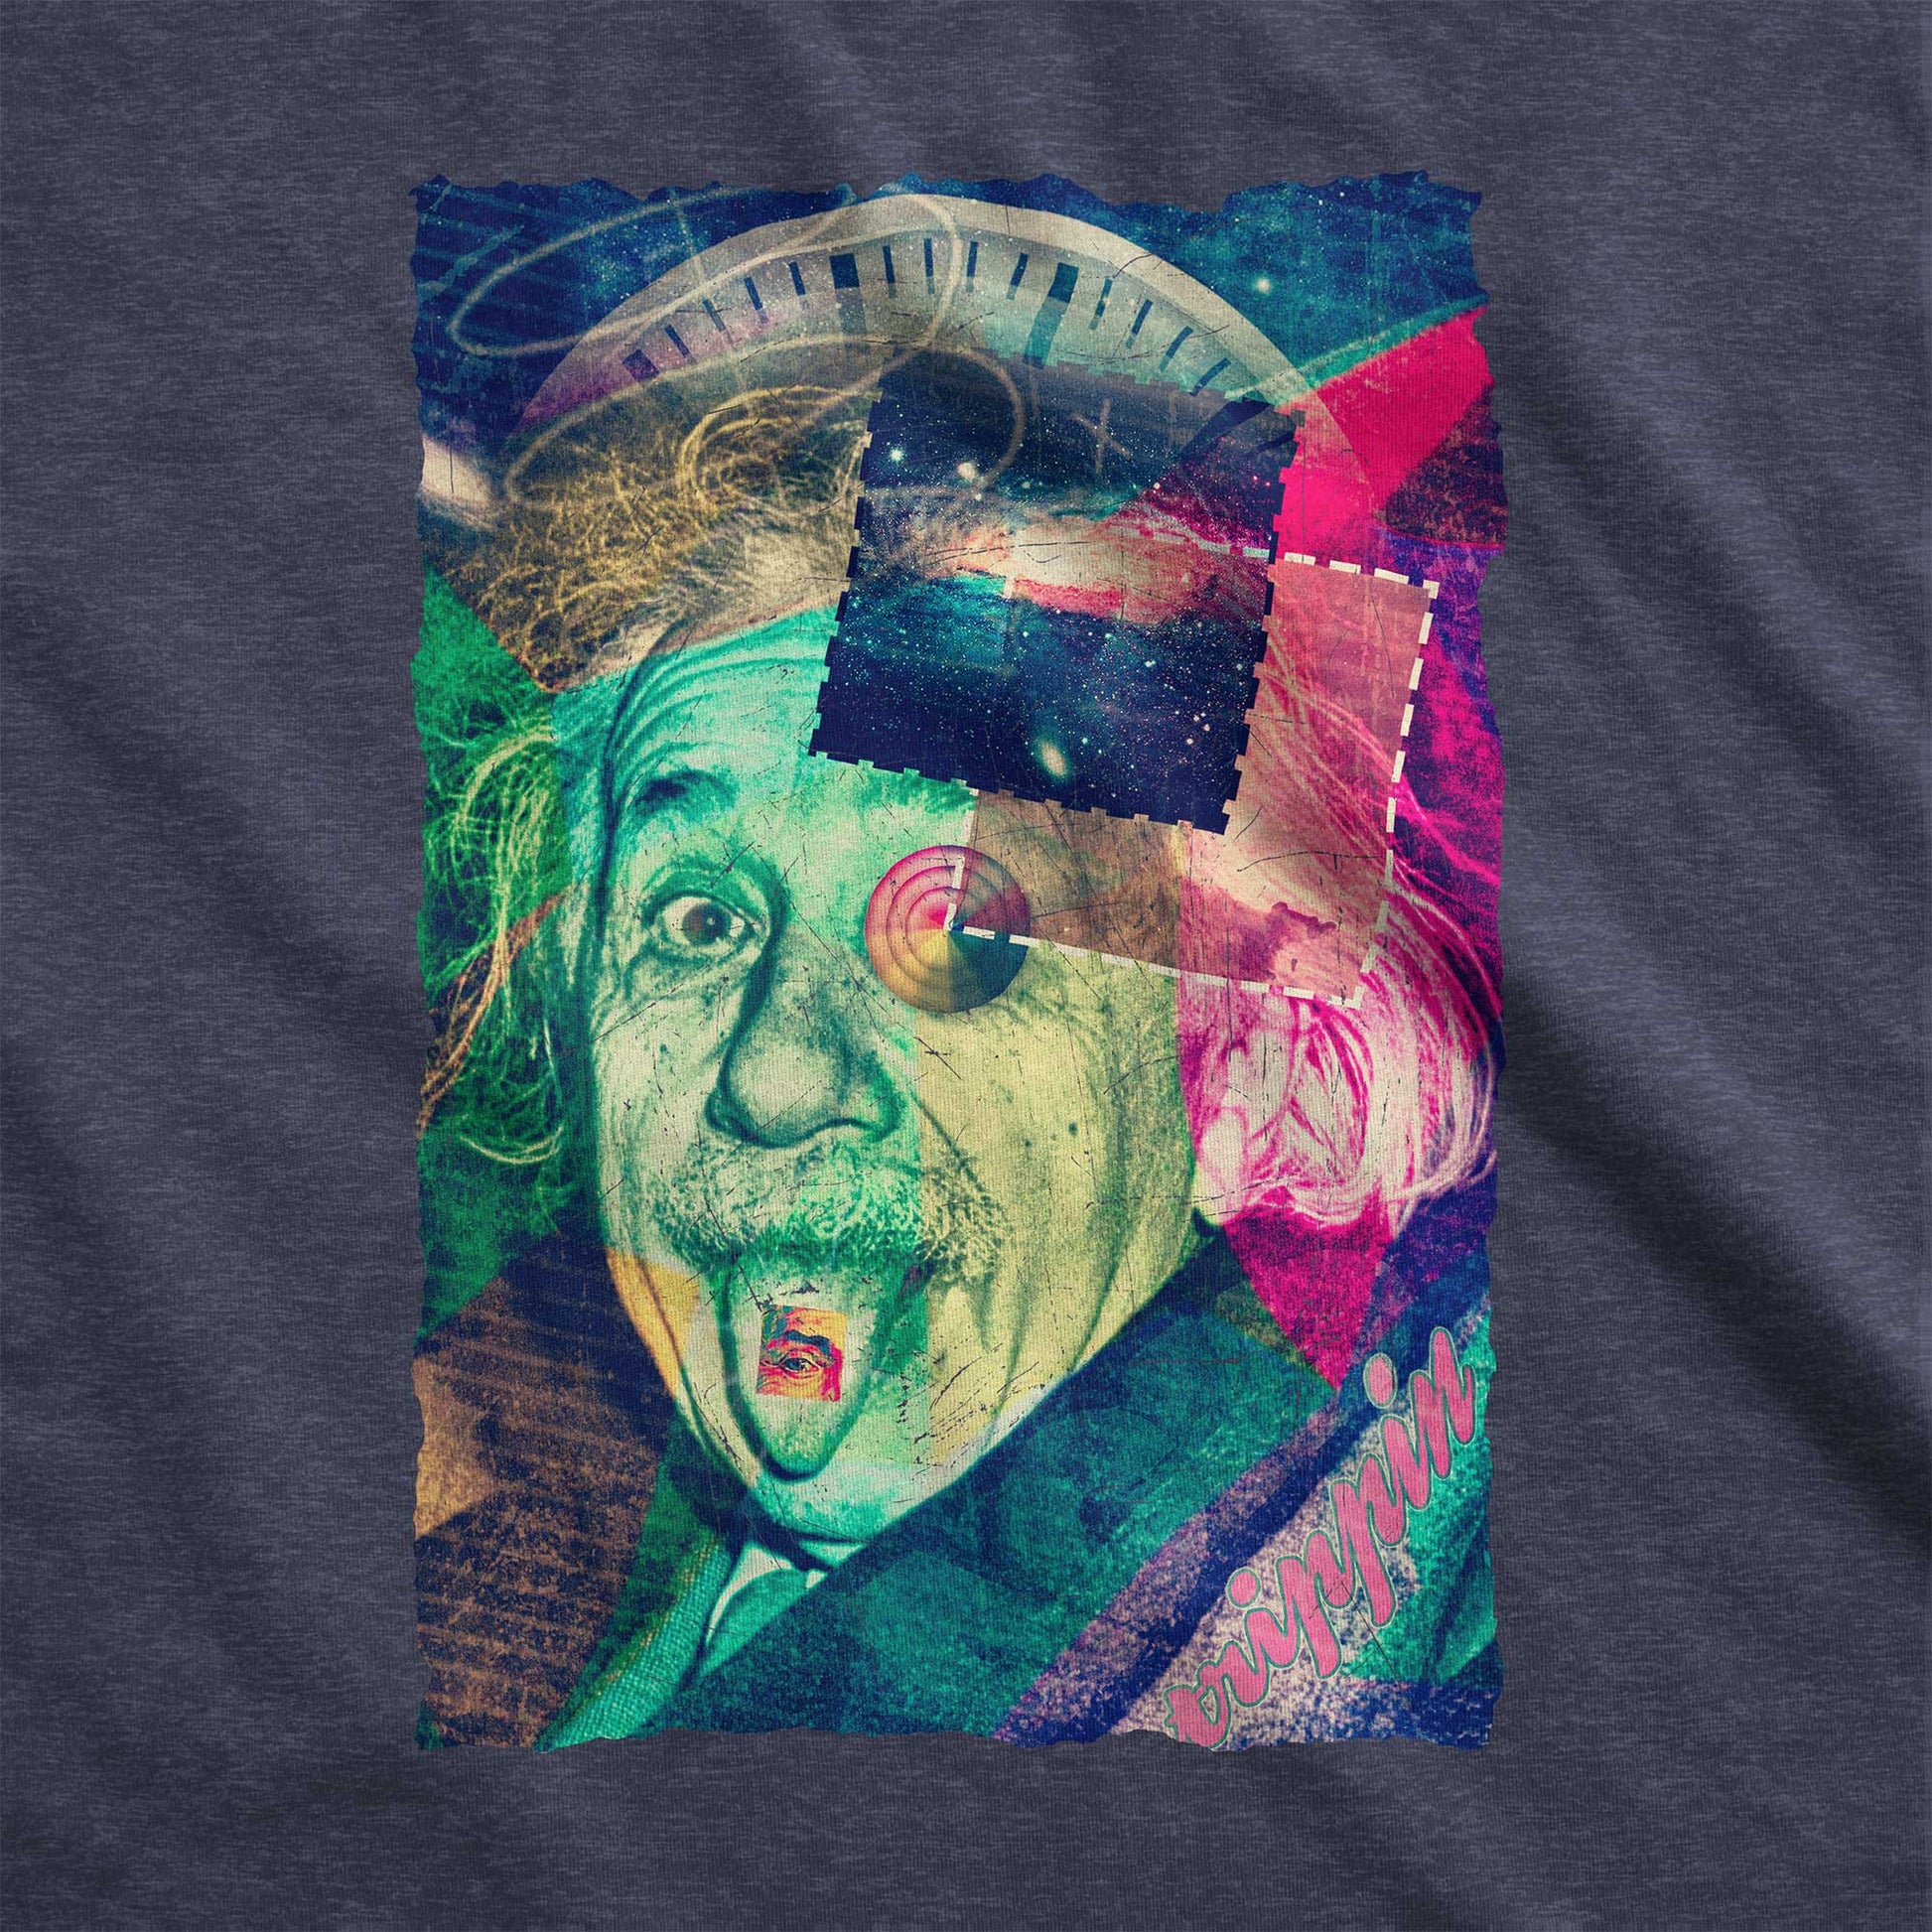 A heather navy Bella Canvas swatch featuring the iconic Albert Einstein photo with his tongue out styled in a vaporwave aesthetic and a LSD paper on his tongue.